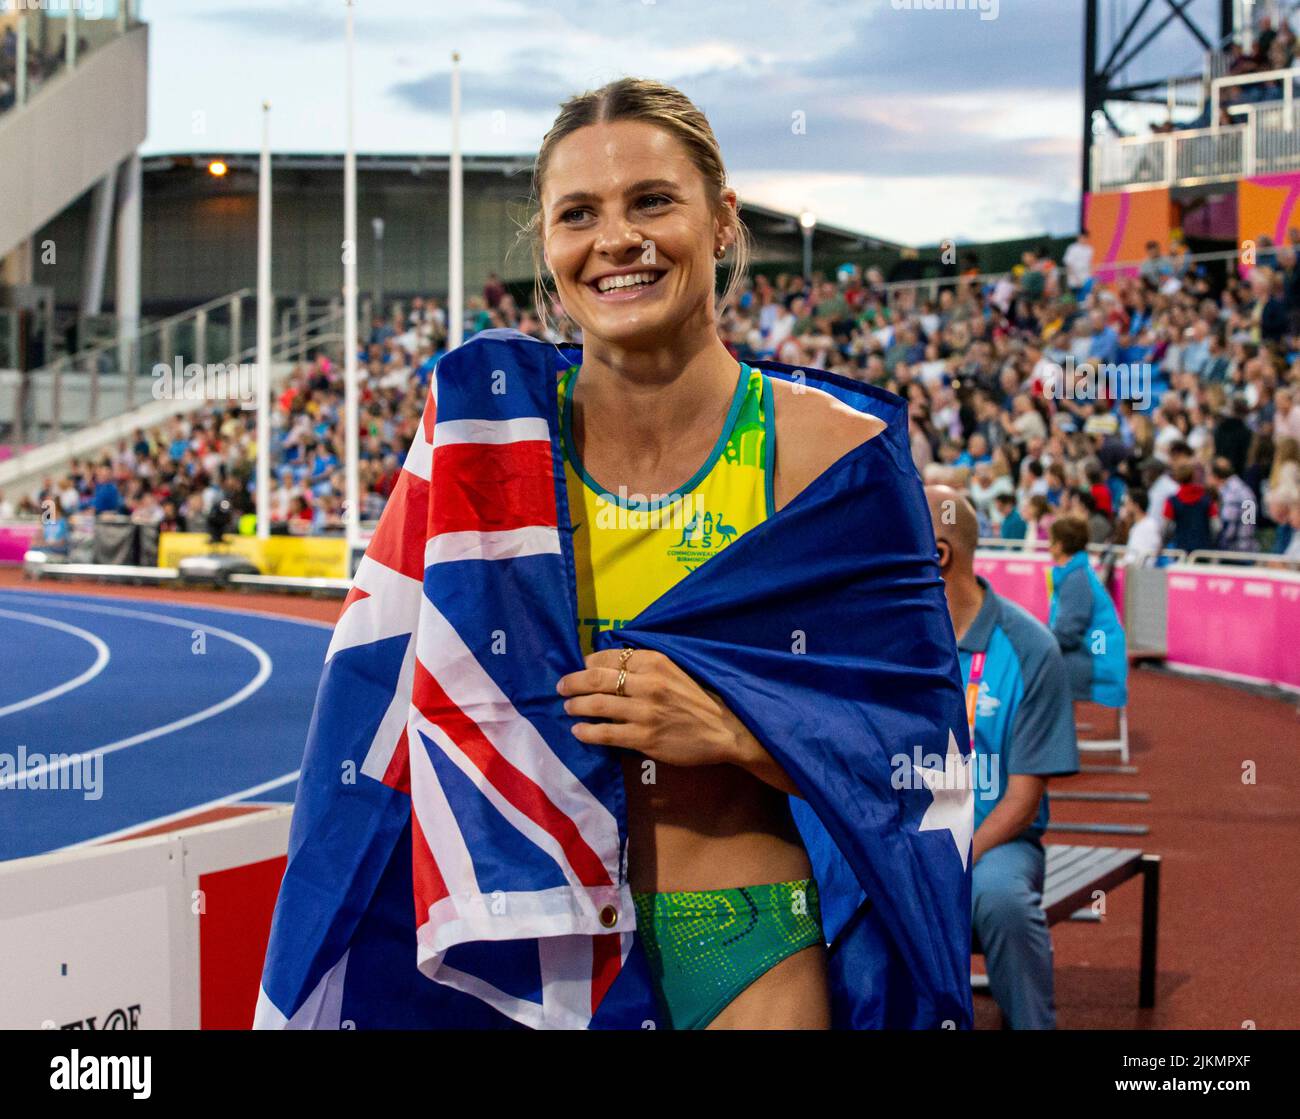 Birmingham, UK. 2nd August 2022; Alexander Stadium, Birmingham, Midlands,  England: Day 5 of the 2022 Commonwealth Games: Nina Kennedy (AUS) with her  national flag celebrates after winning the Gold Medal in the